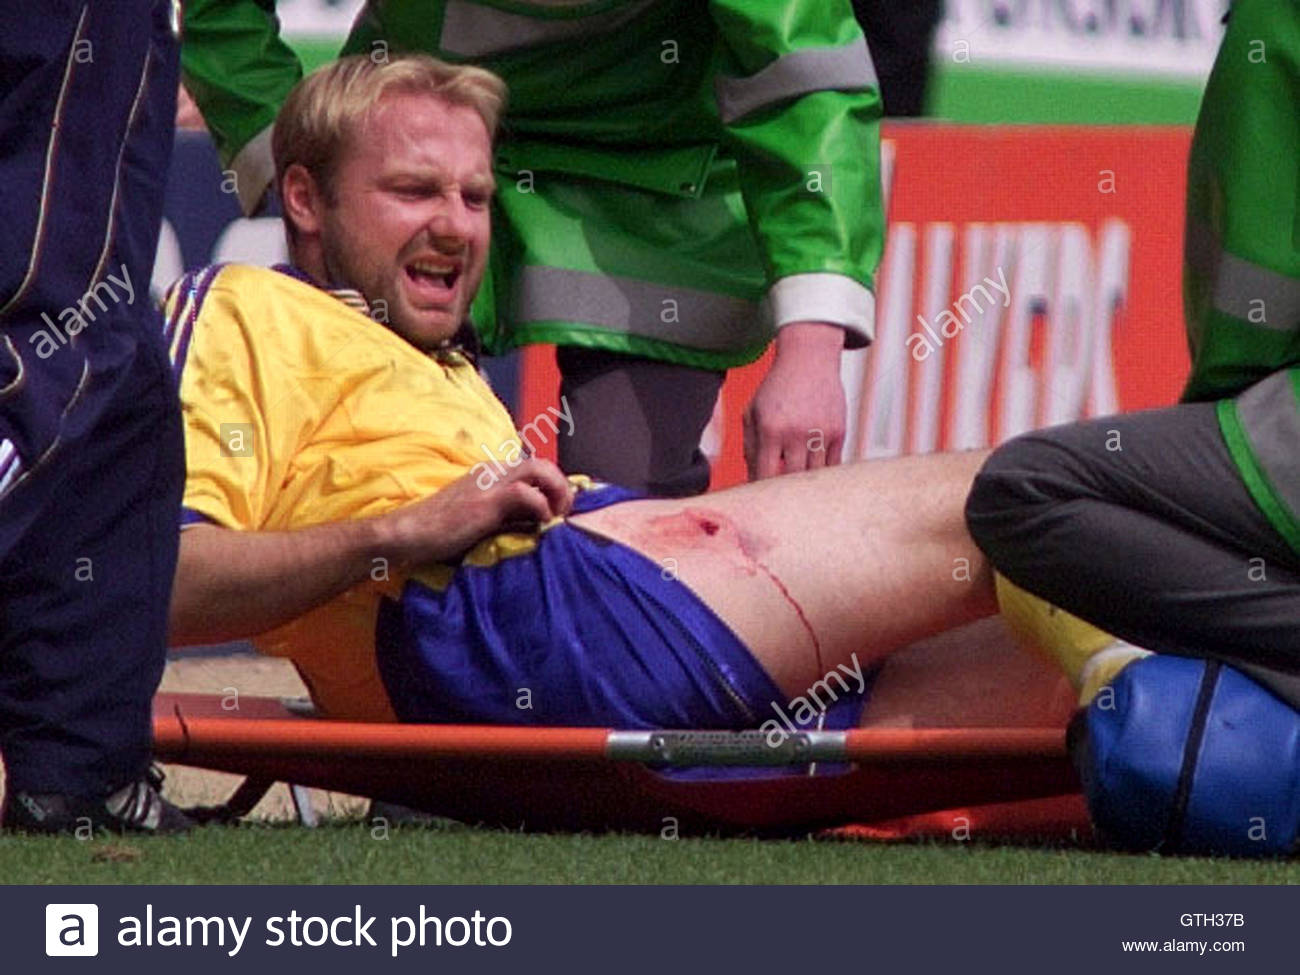 swedens-hakan-mild-yells-in-agony-from-an-injury-recieved-in-a-tackle-GTH37B.jpg